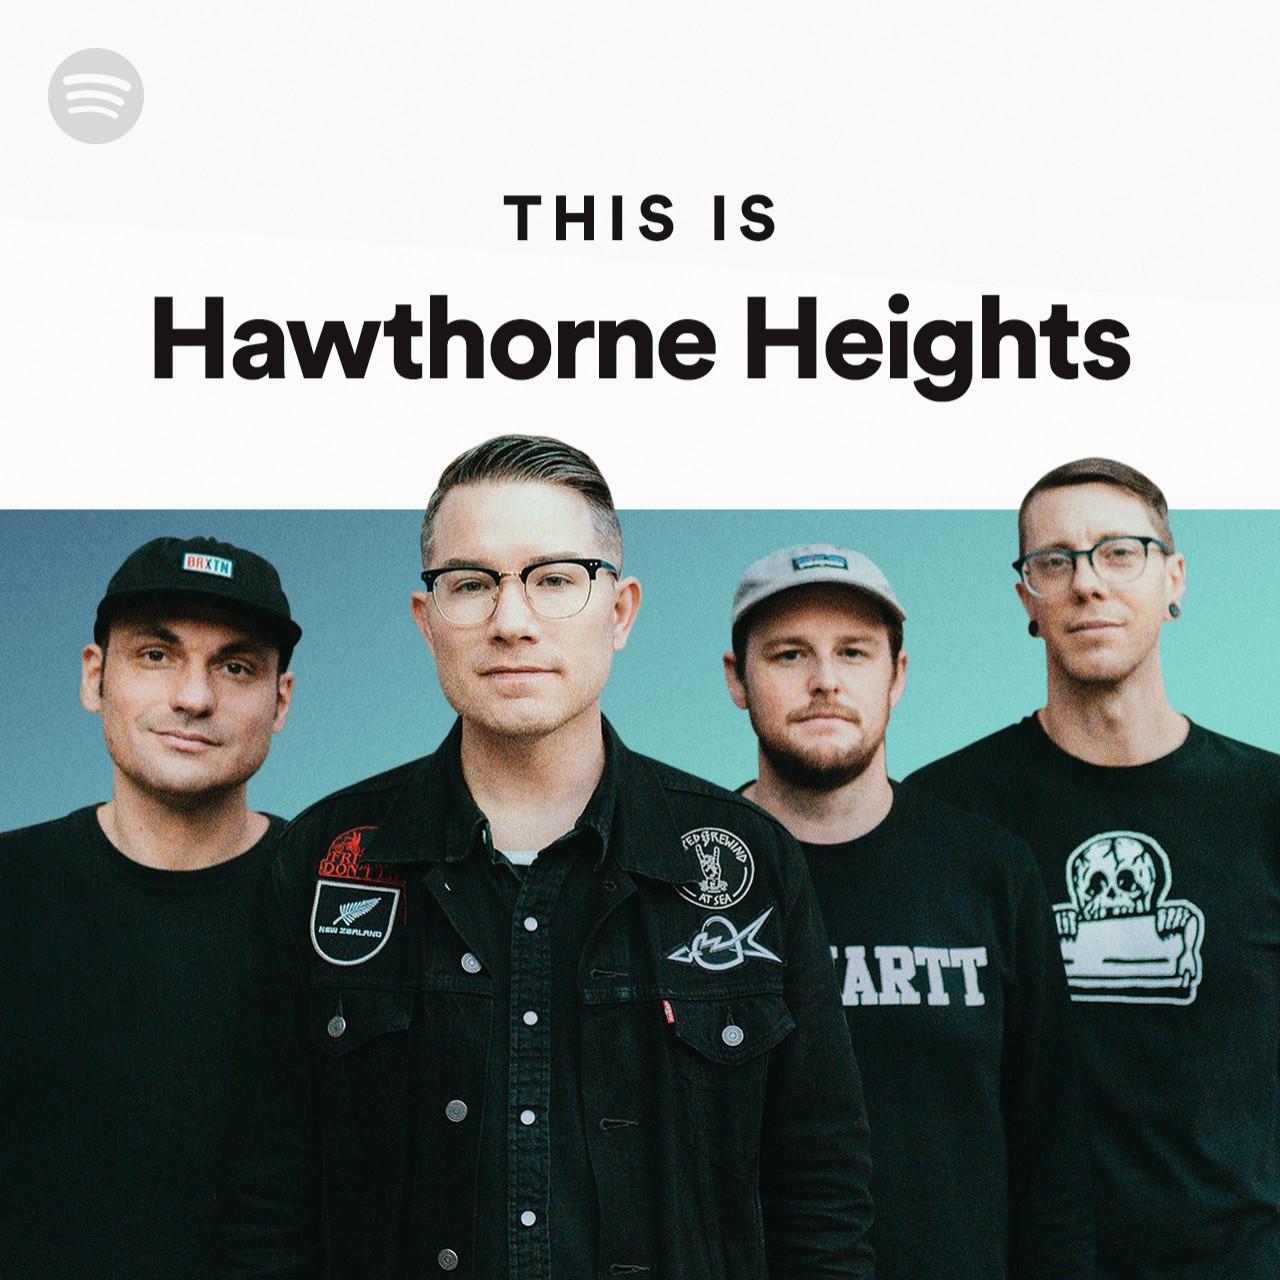 This Is Hawthorne Heights